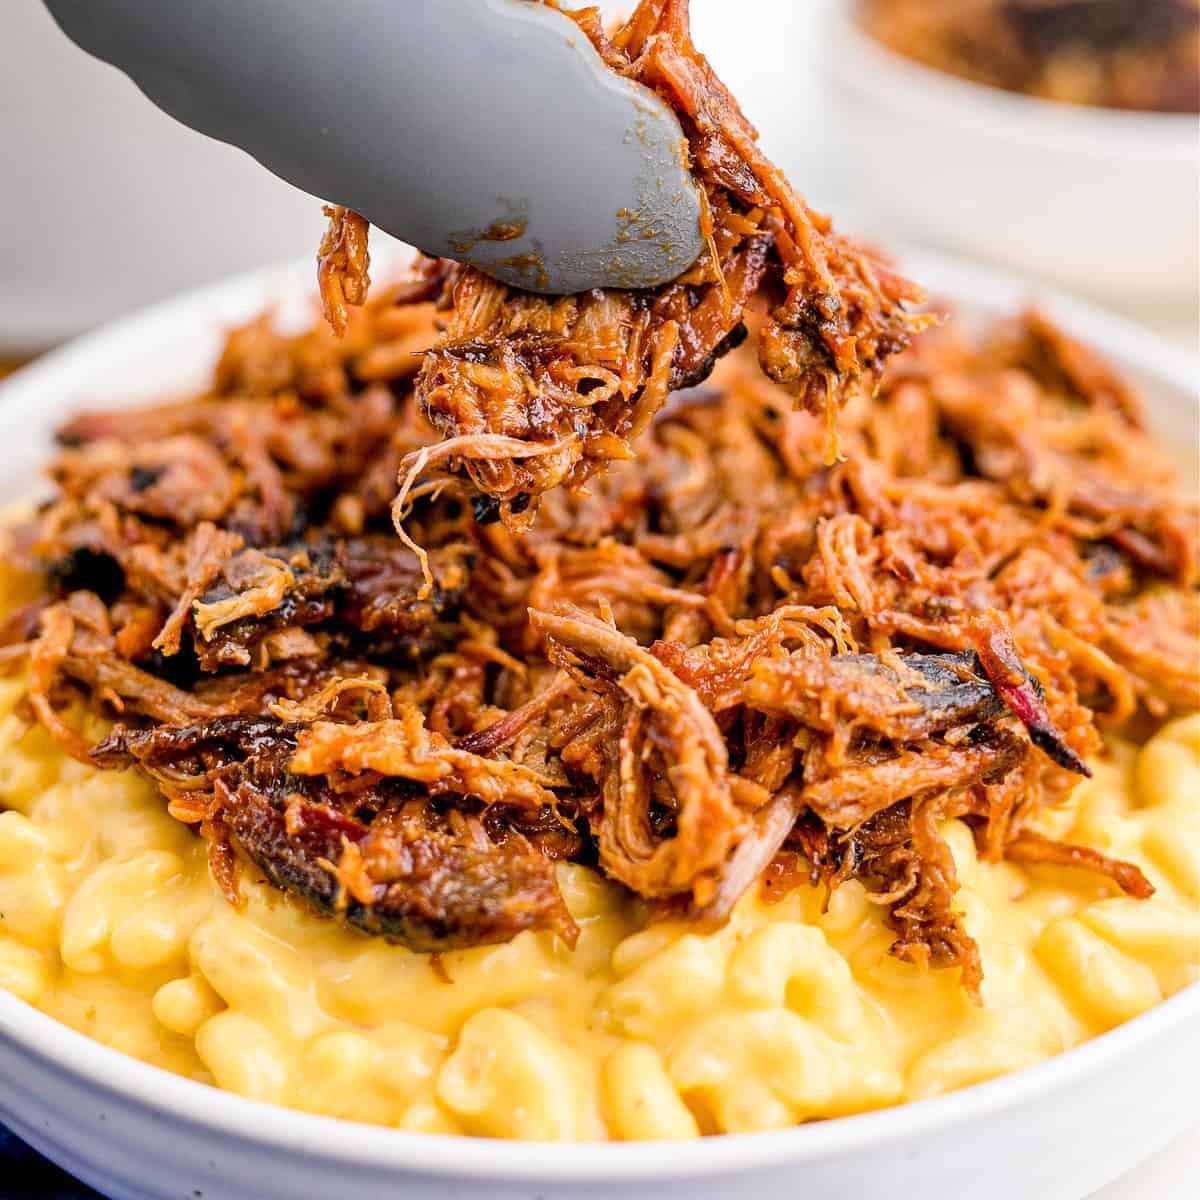 Pulled Pork Mac and Cheese